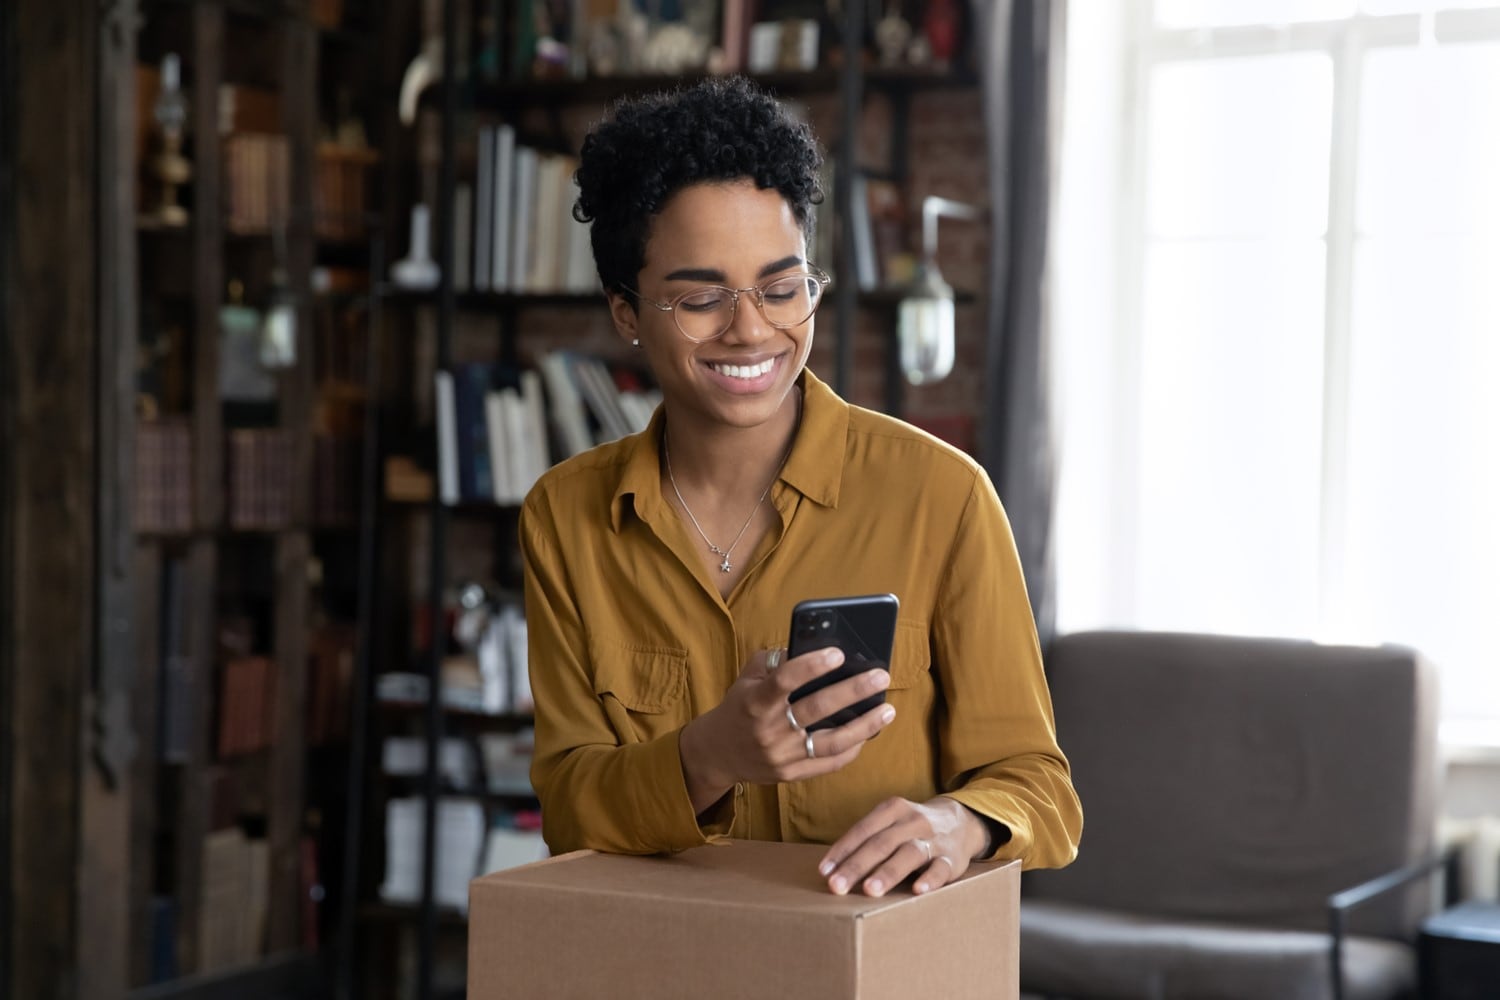 A women checks her smartphone while holding a boxed package in her home.